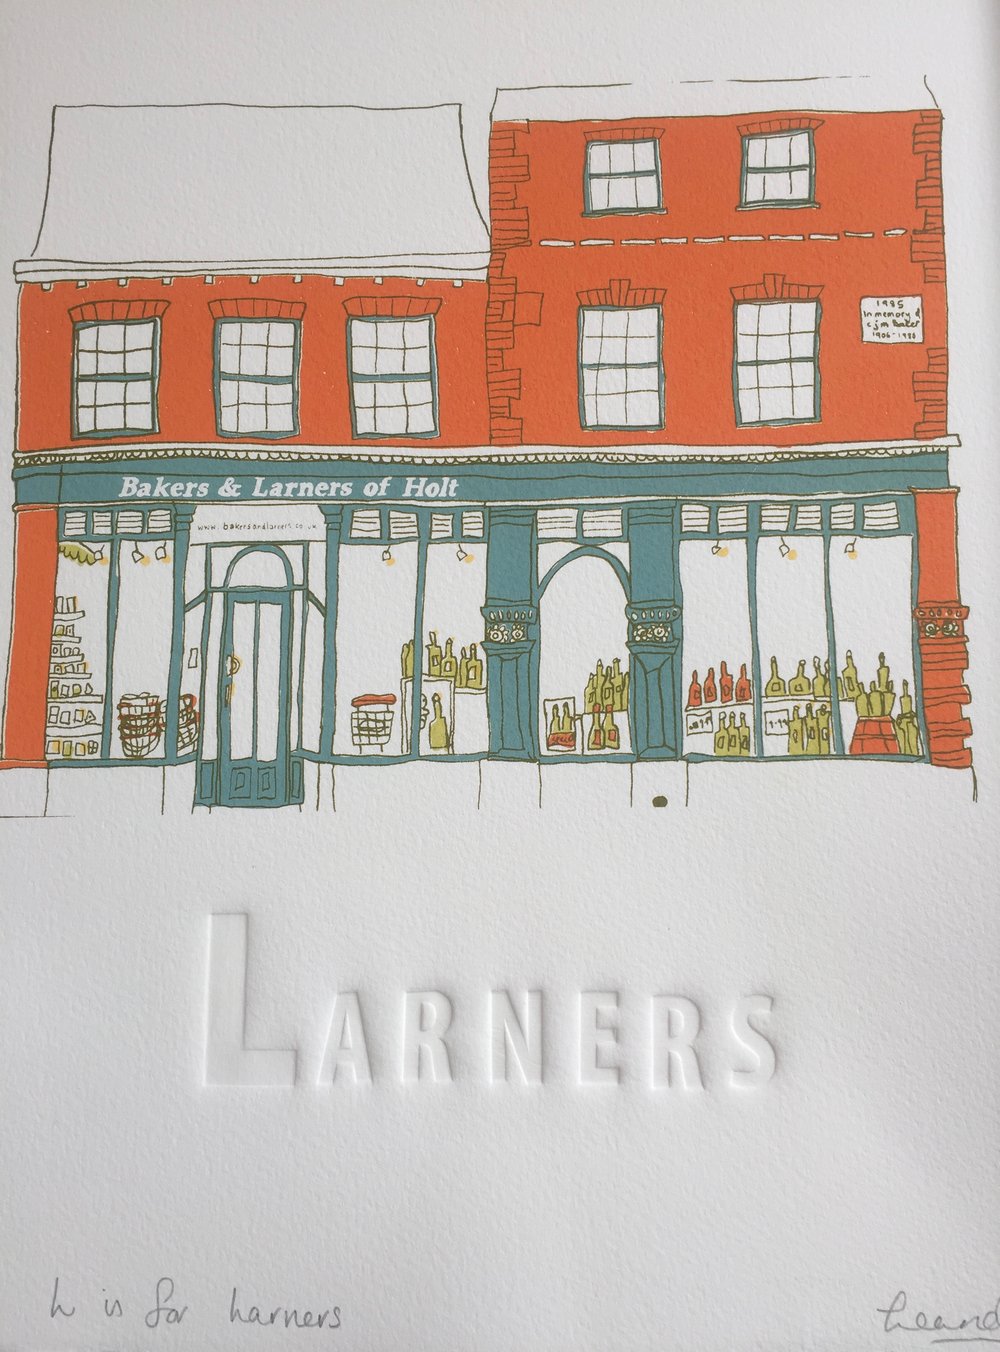 Image of L is for Larners of Holt